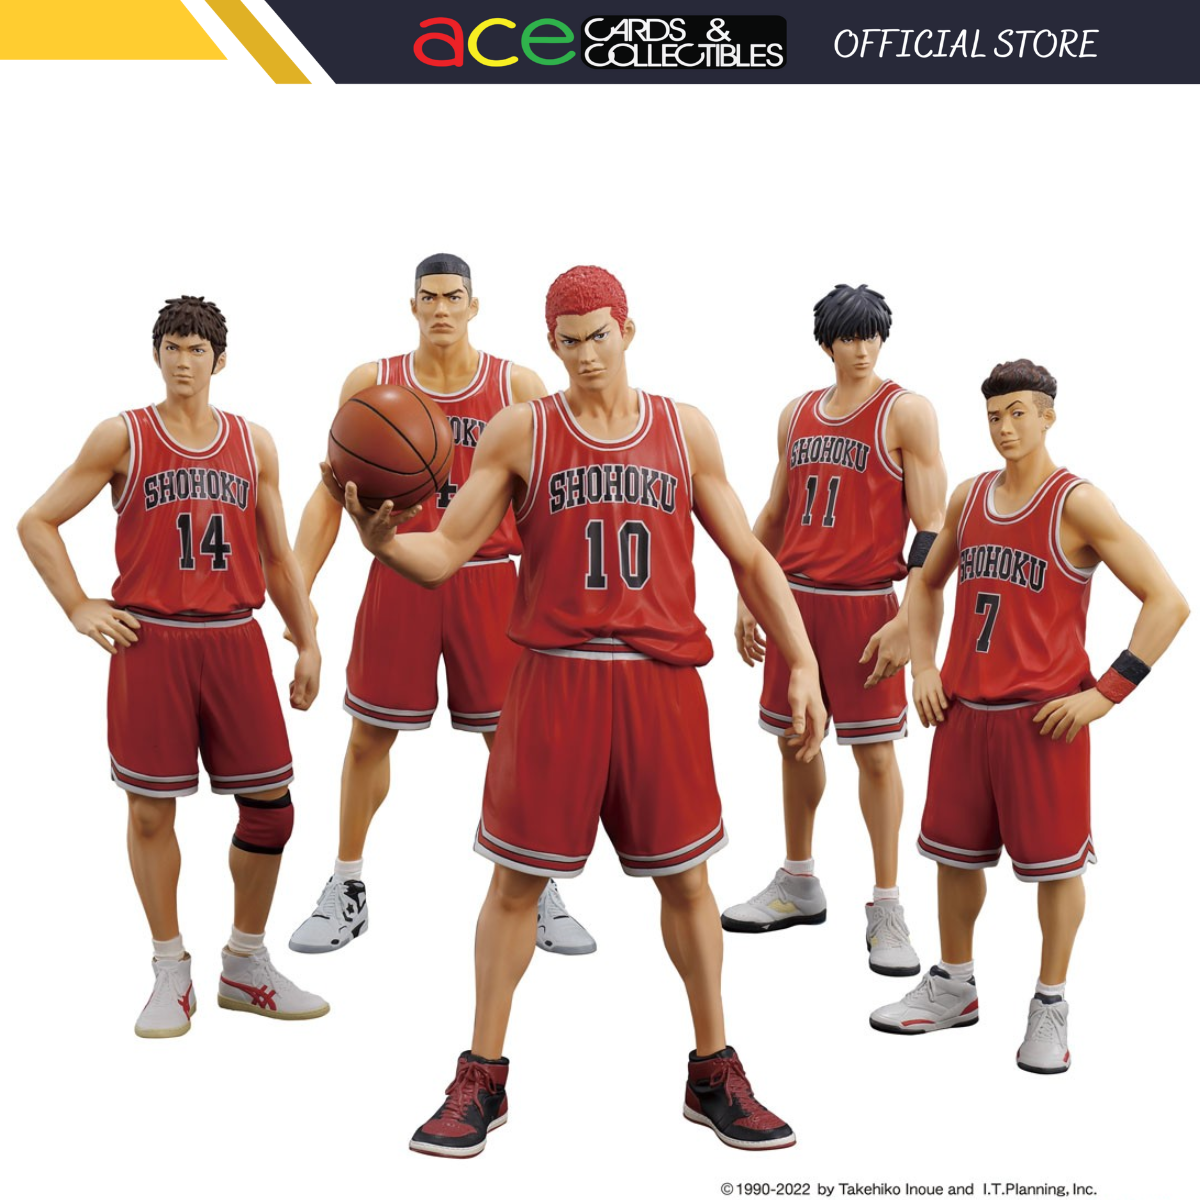 One And Only Slam Dunk Shohoku Starting Member Set-Union Creative-Ace Cards & Collectibles